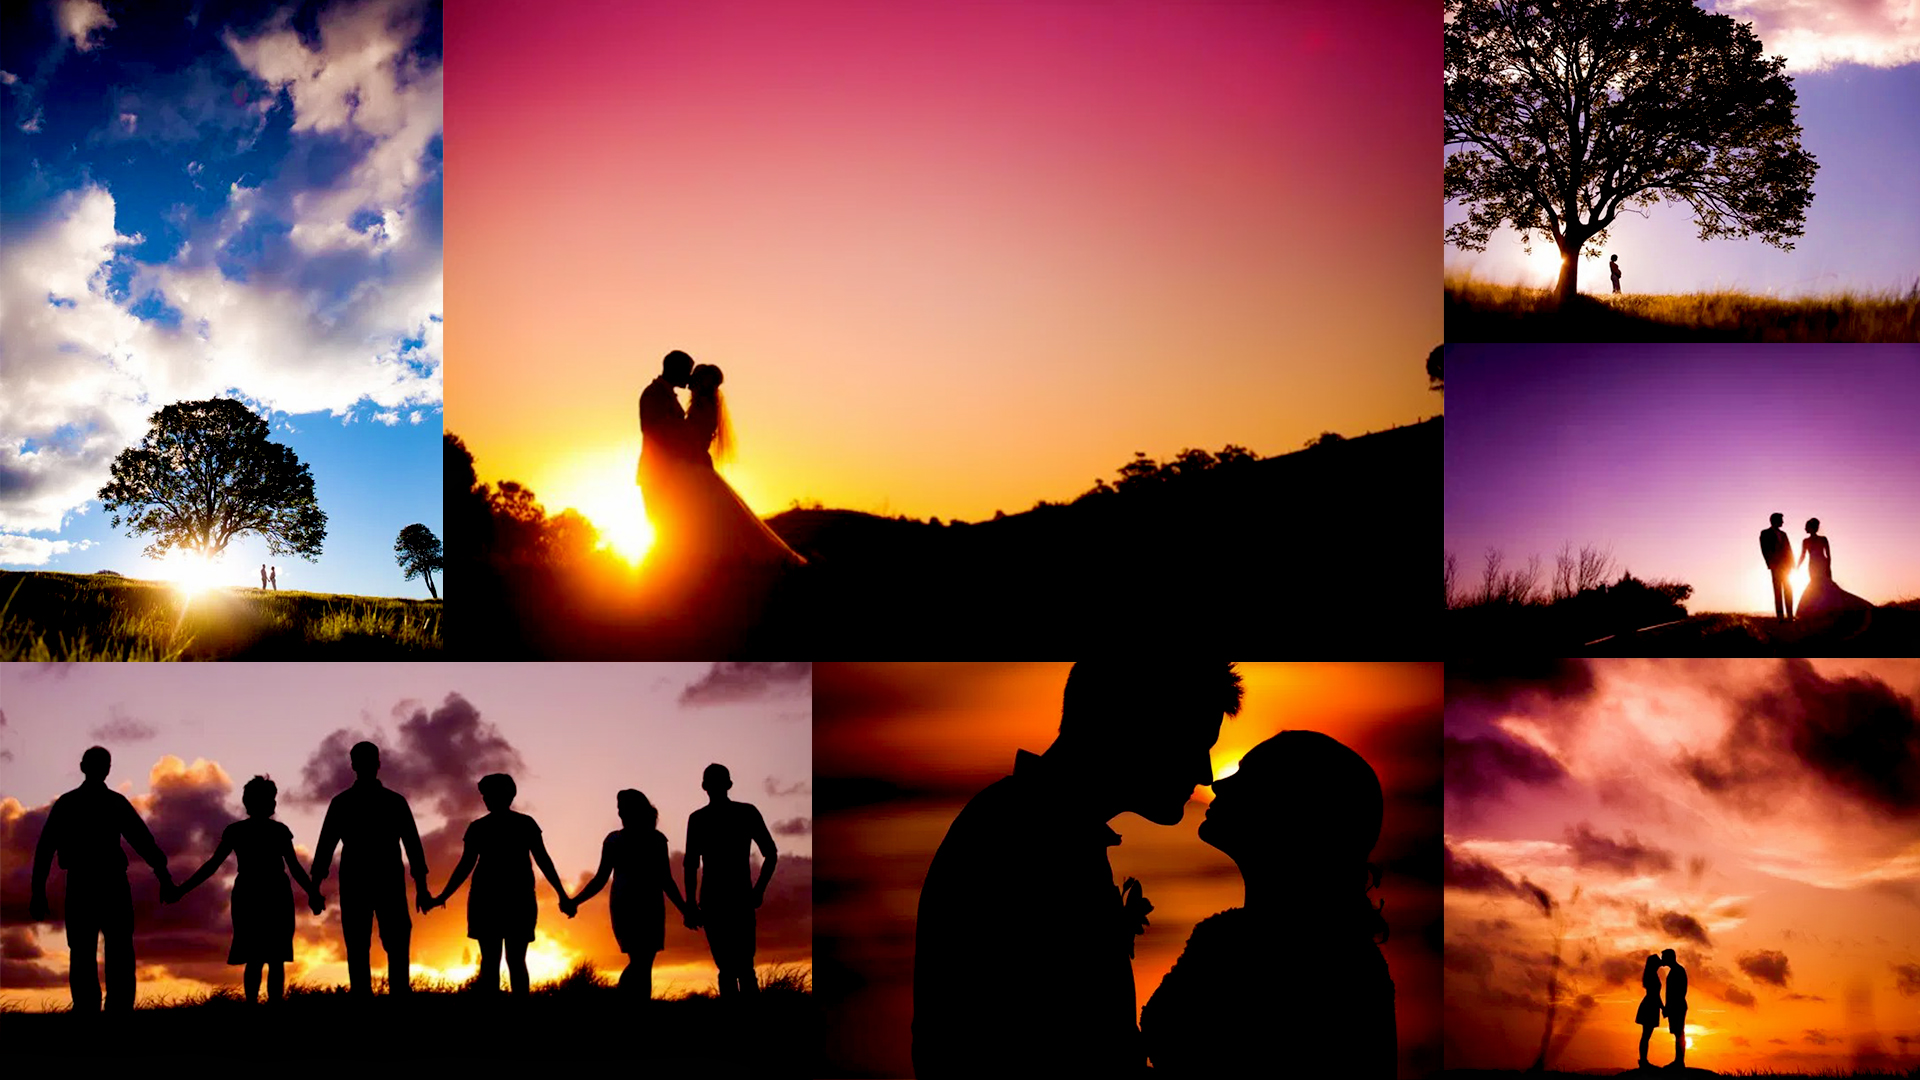 Perfect Silhouette Portrait Photography: 5 Tips For Awesome Silhouette Photography